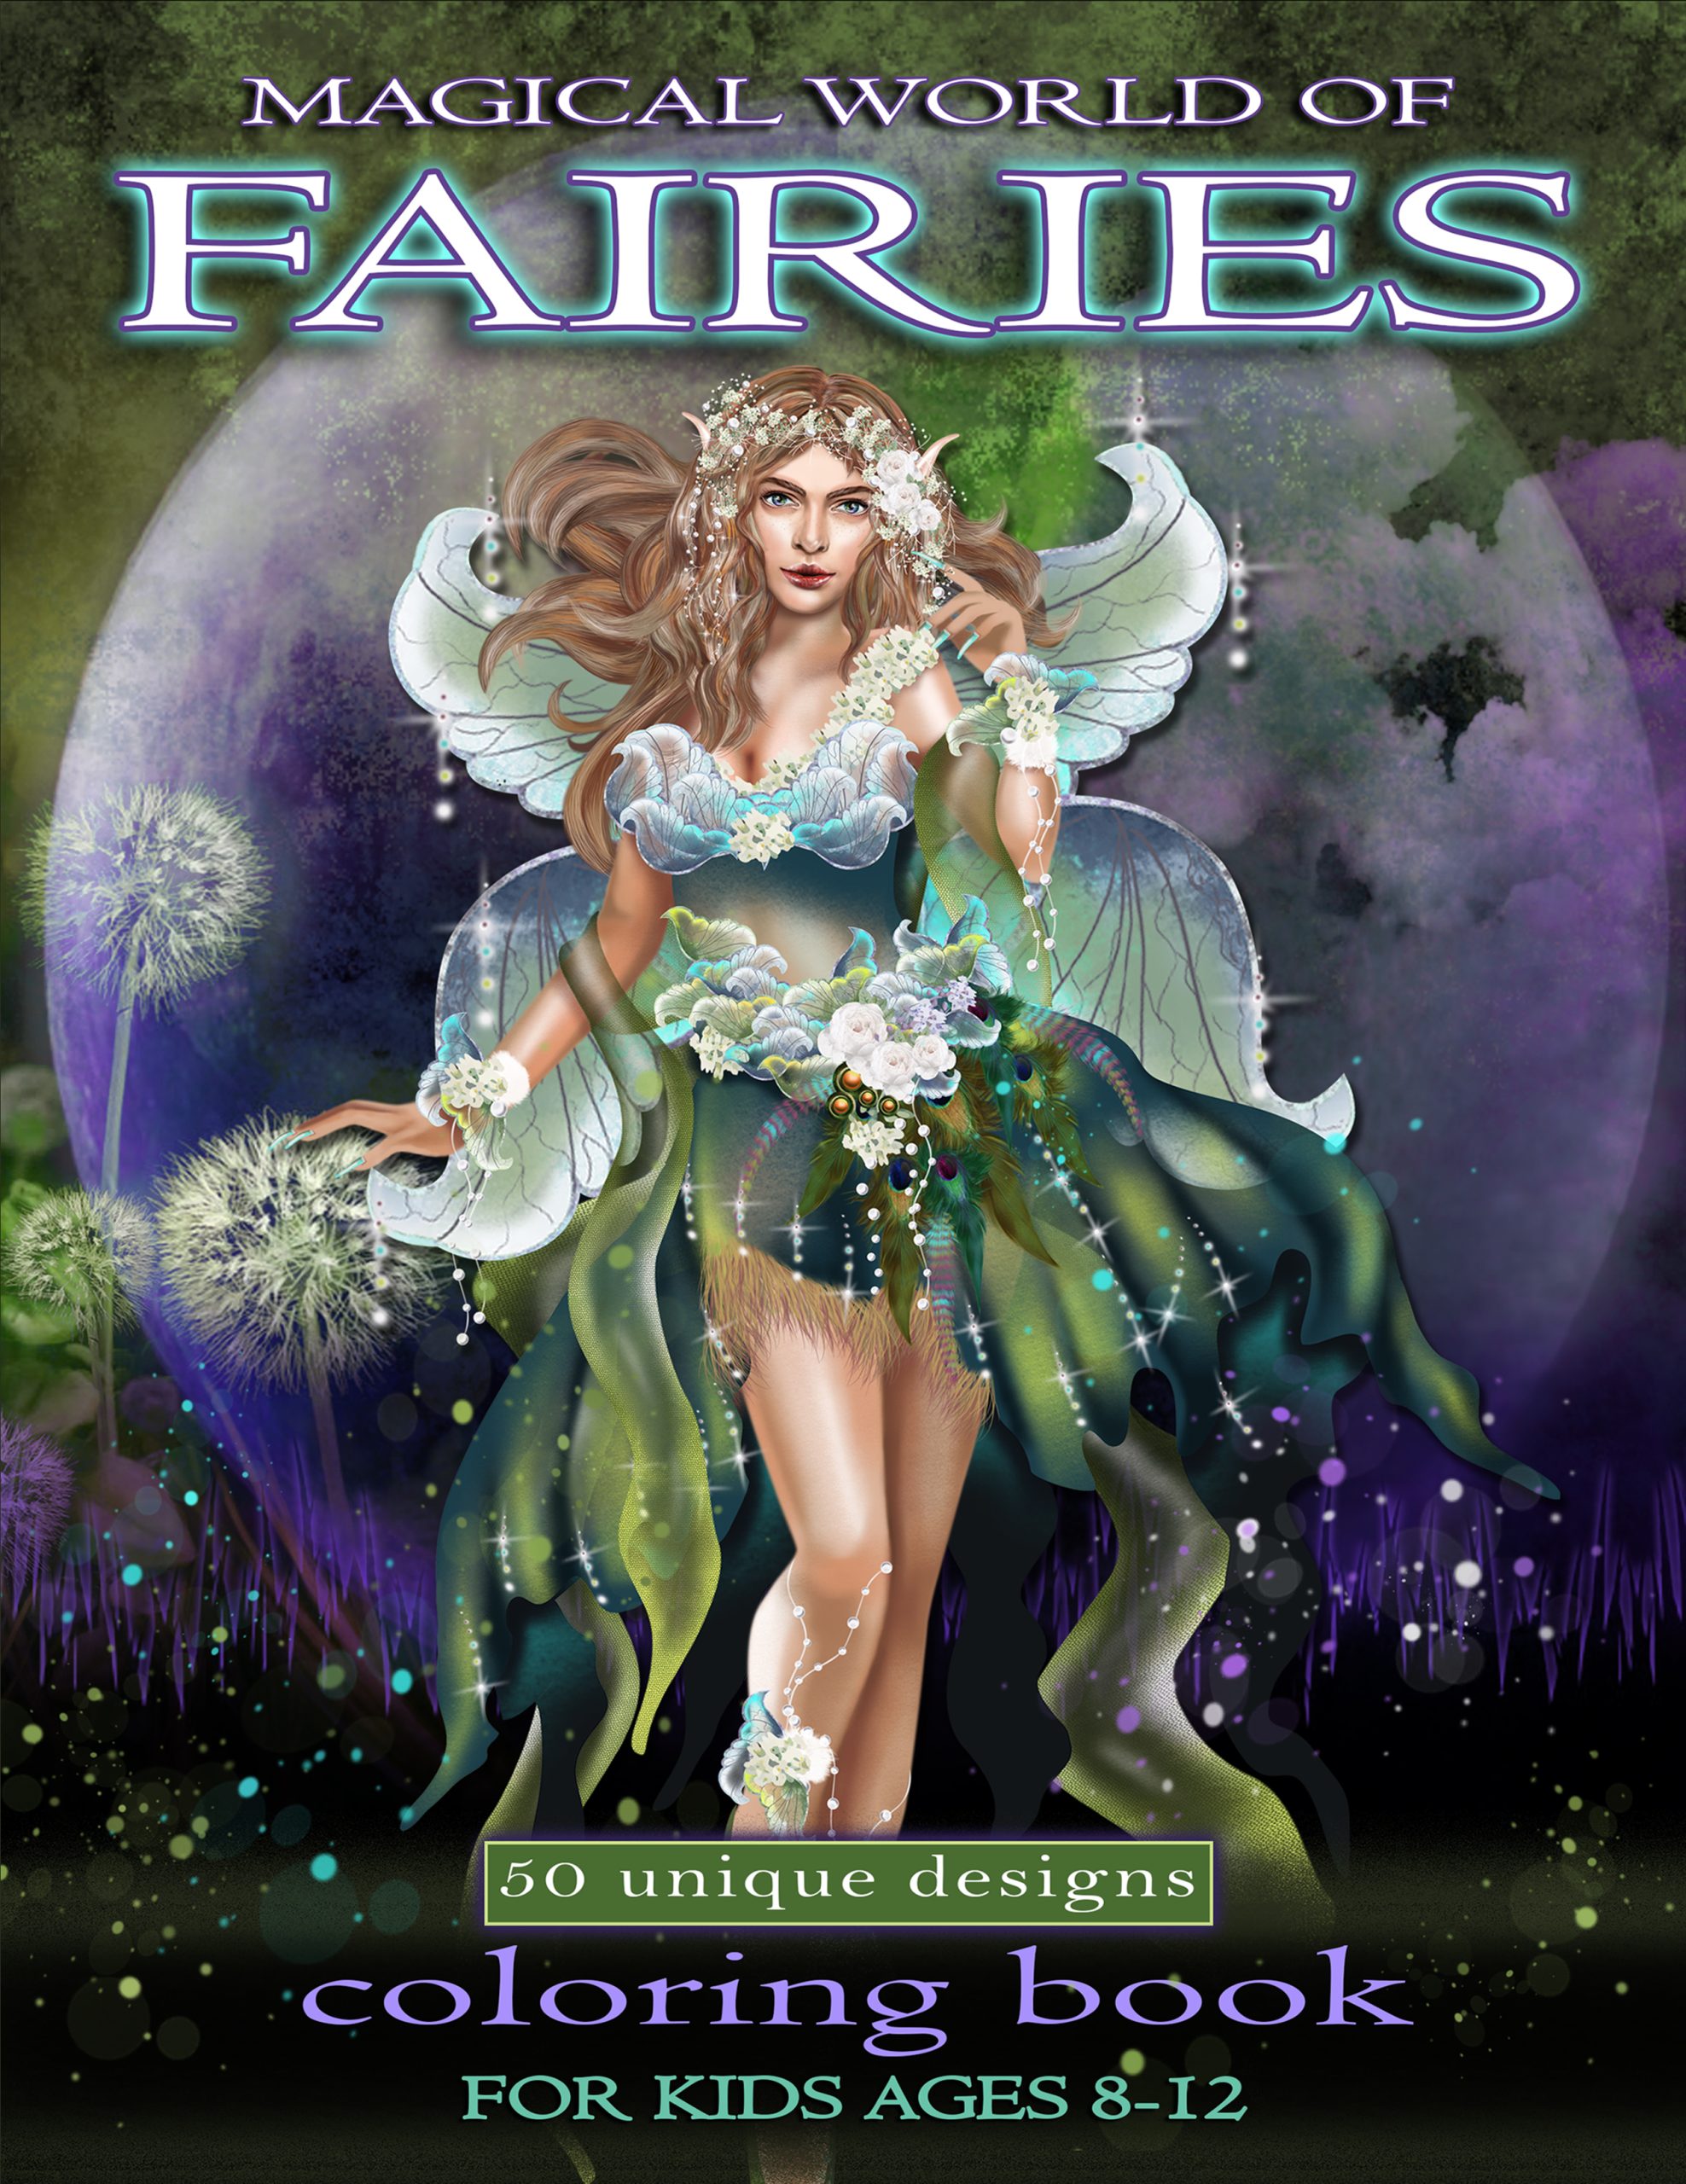 Magical World of Fairies coloring book 8-12 years